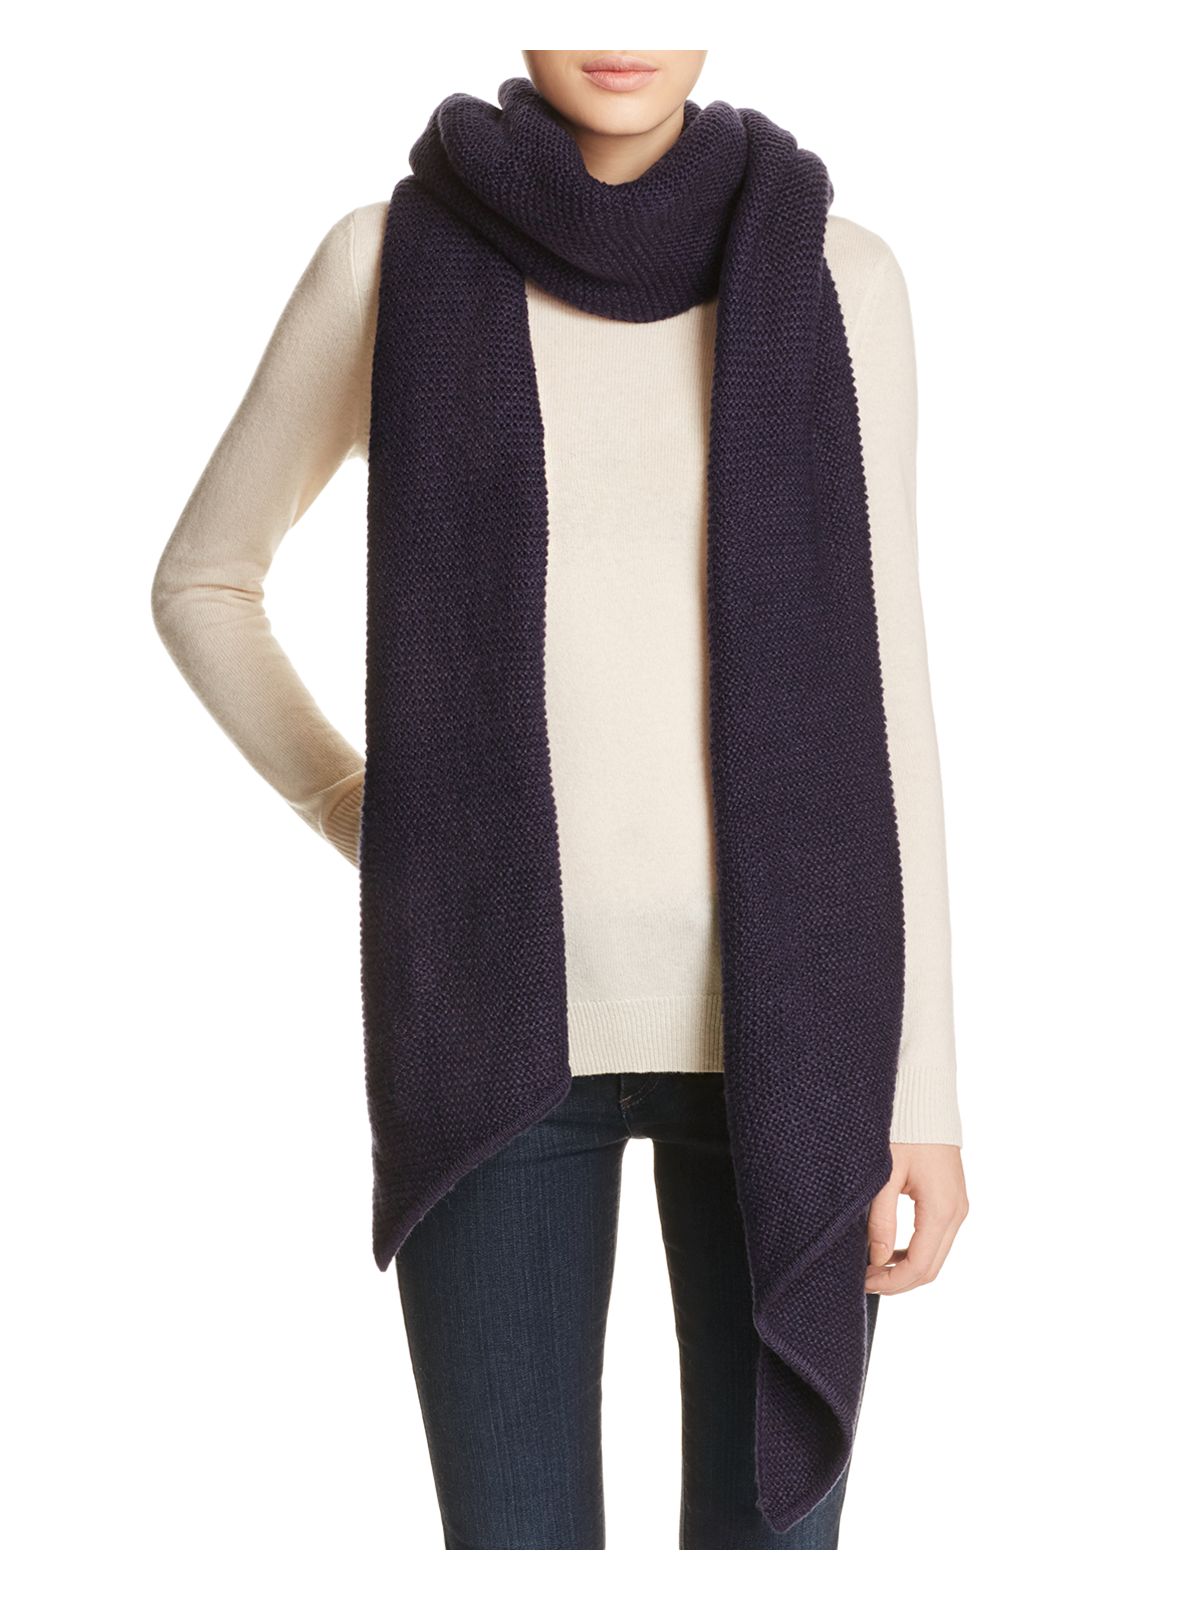 REBECCA MINKOFF Womens Navy Acrylic Knitted Winter Scarf